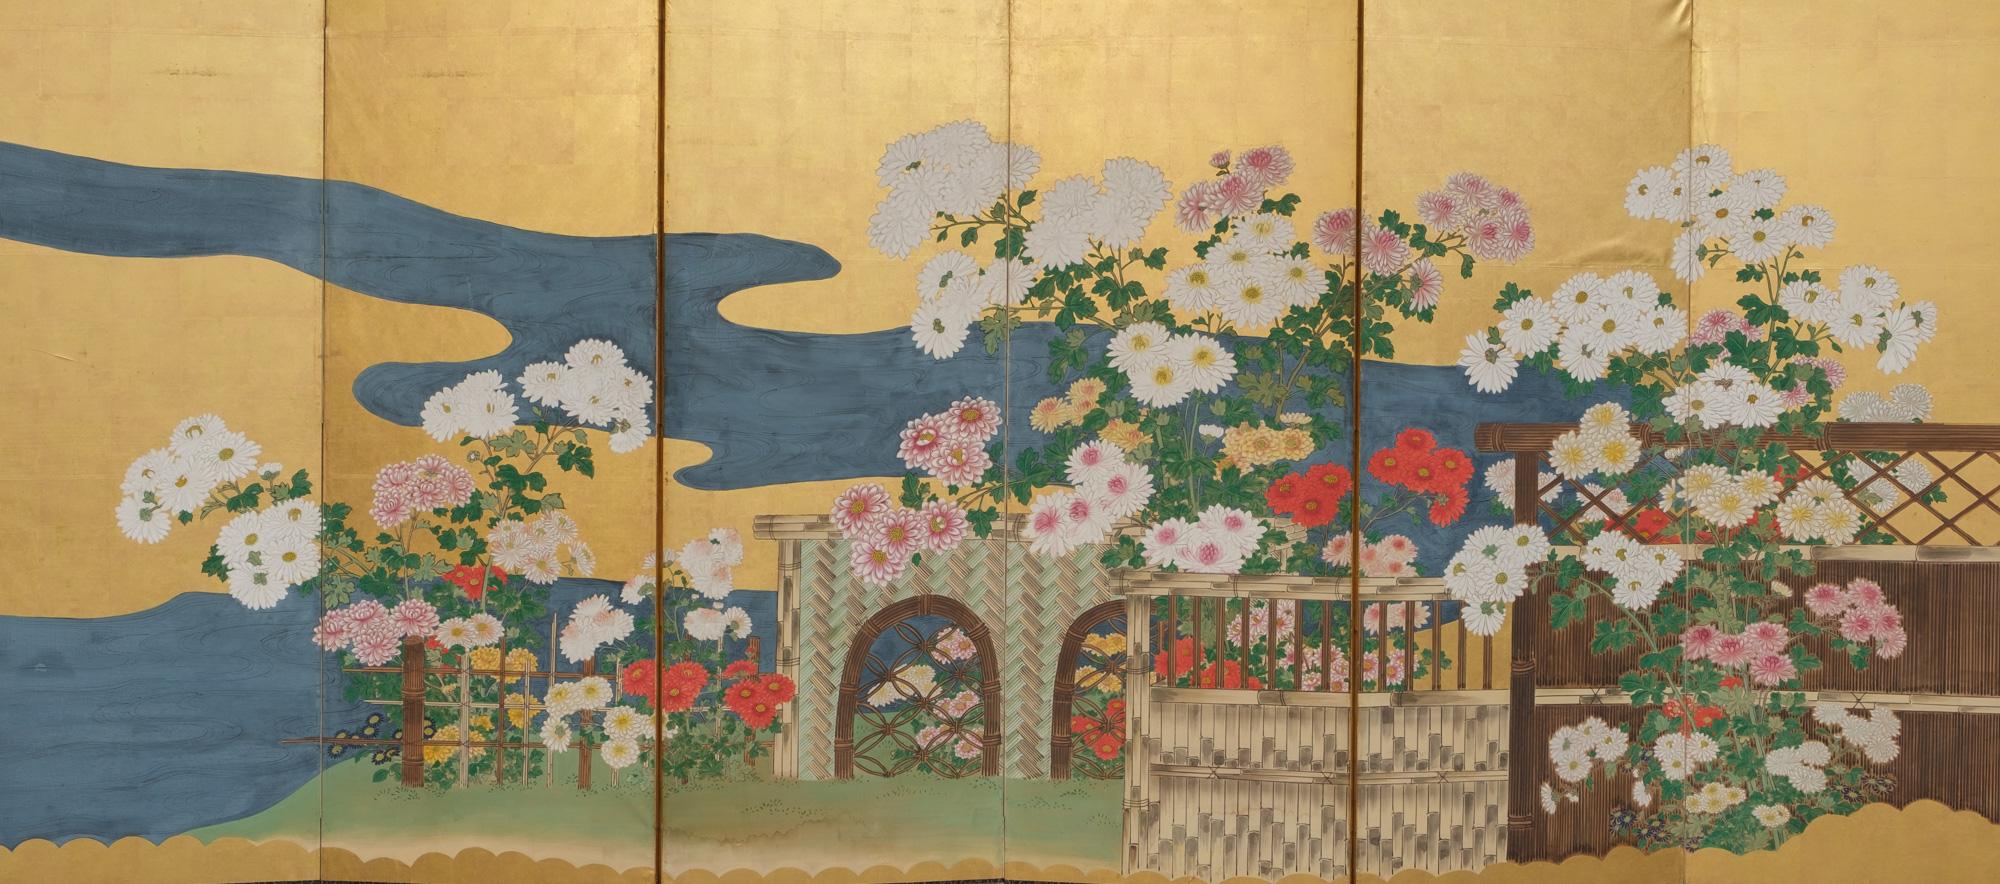 A very colourful and captivating large six-panel byôbu (folding screen) with a refined continuous painting of a luscious flower garden filled with many different types of chrysanthemums (kiku), next to a winding river.

This multi-coloured painting